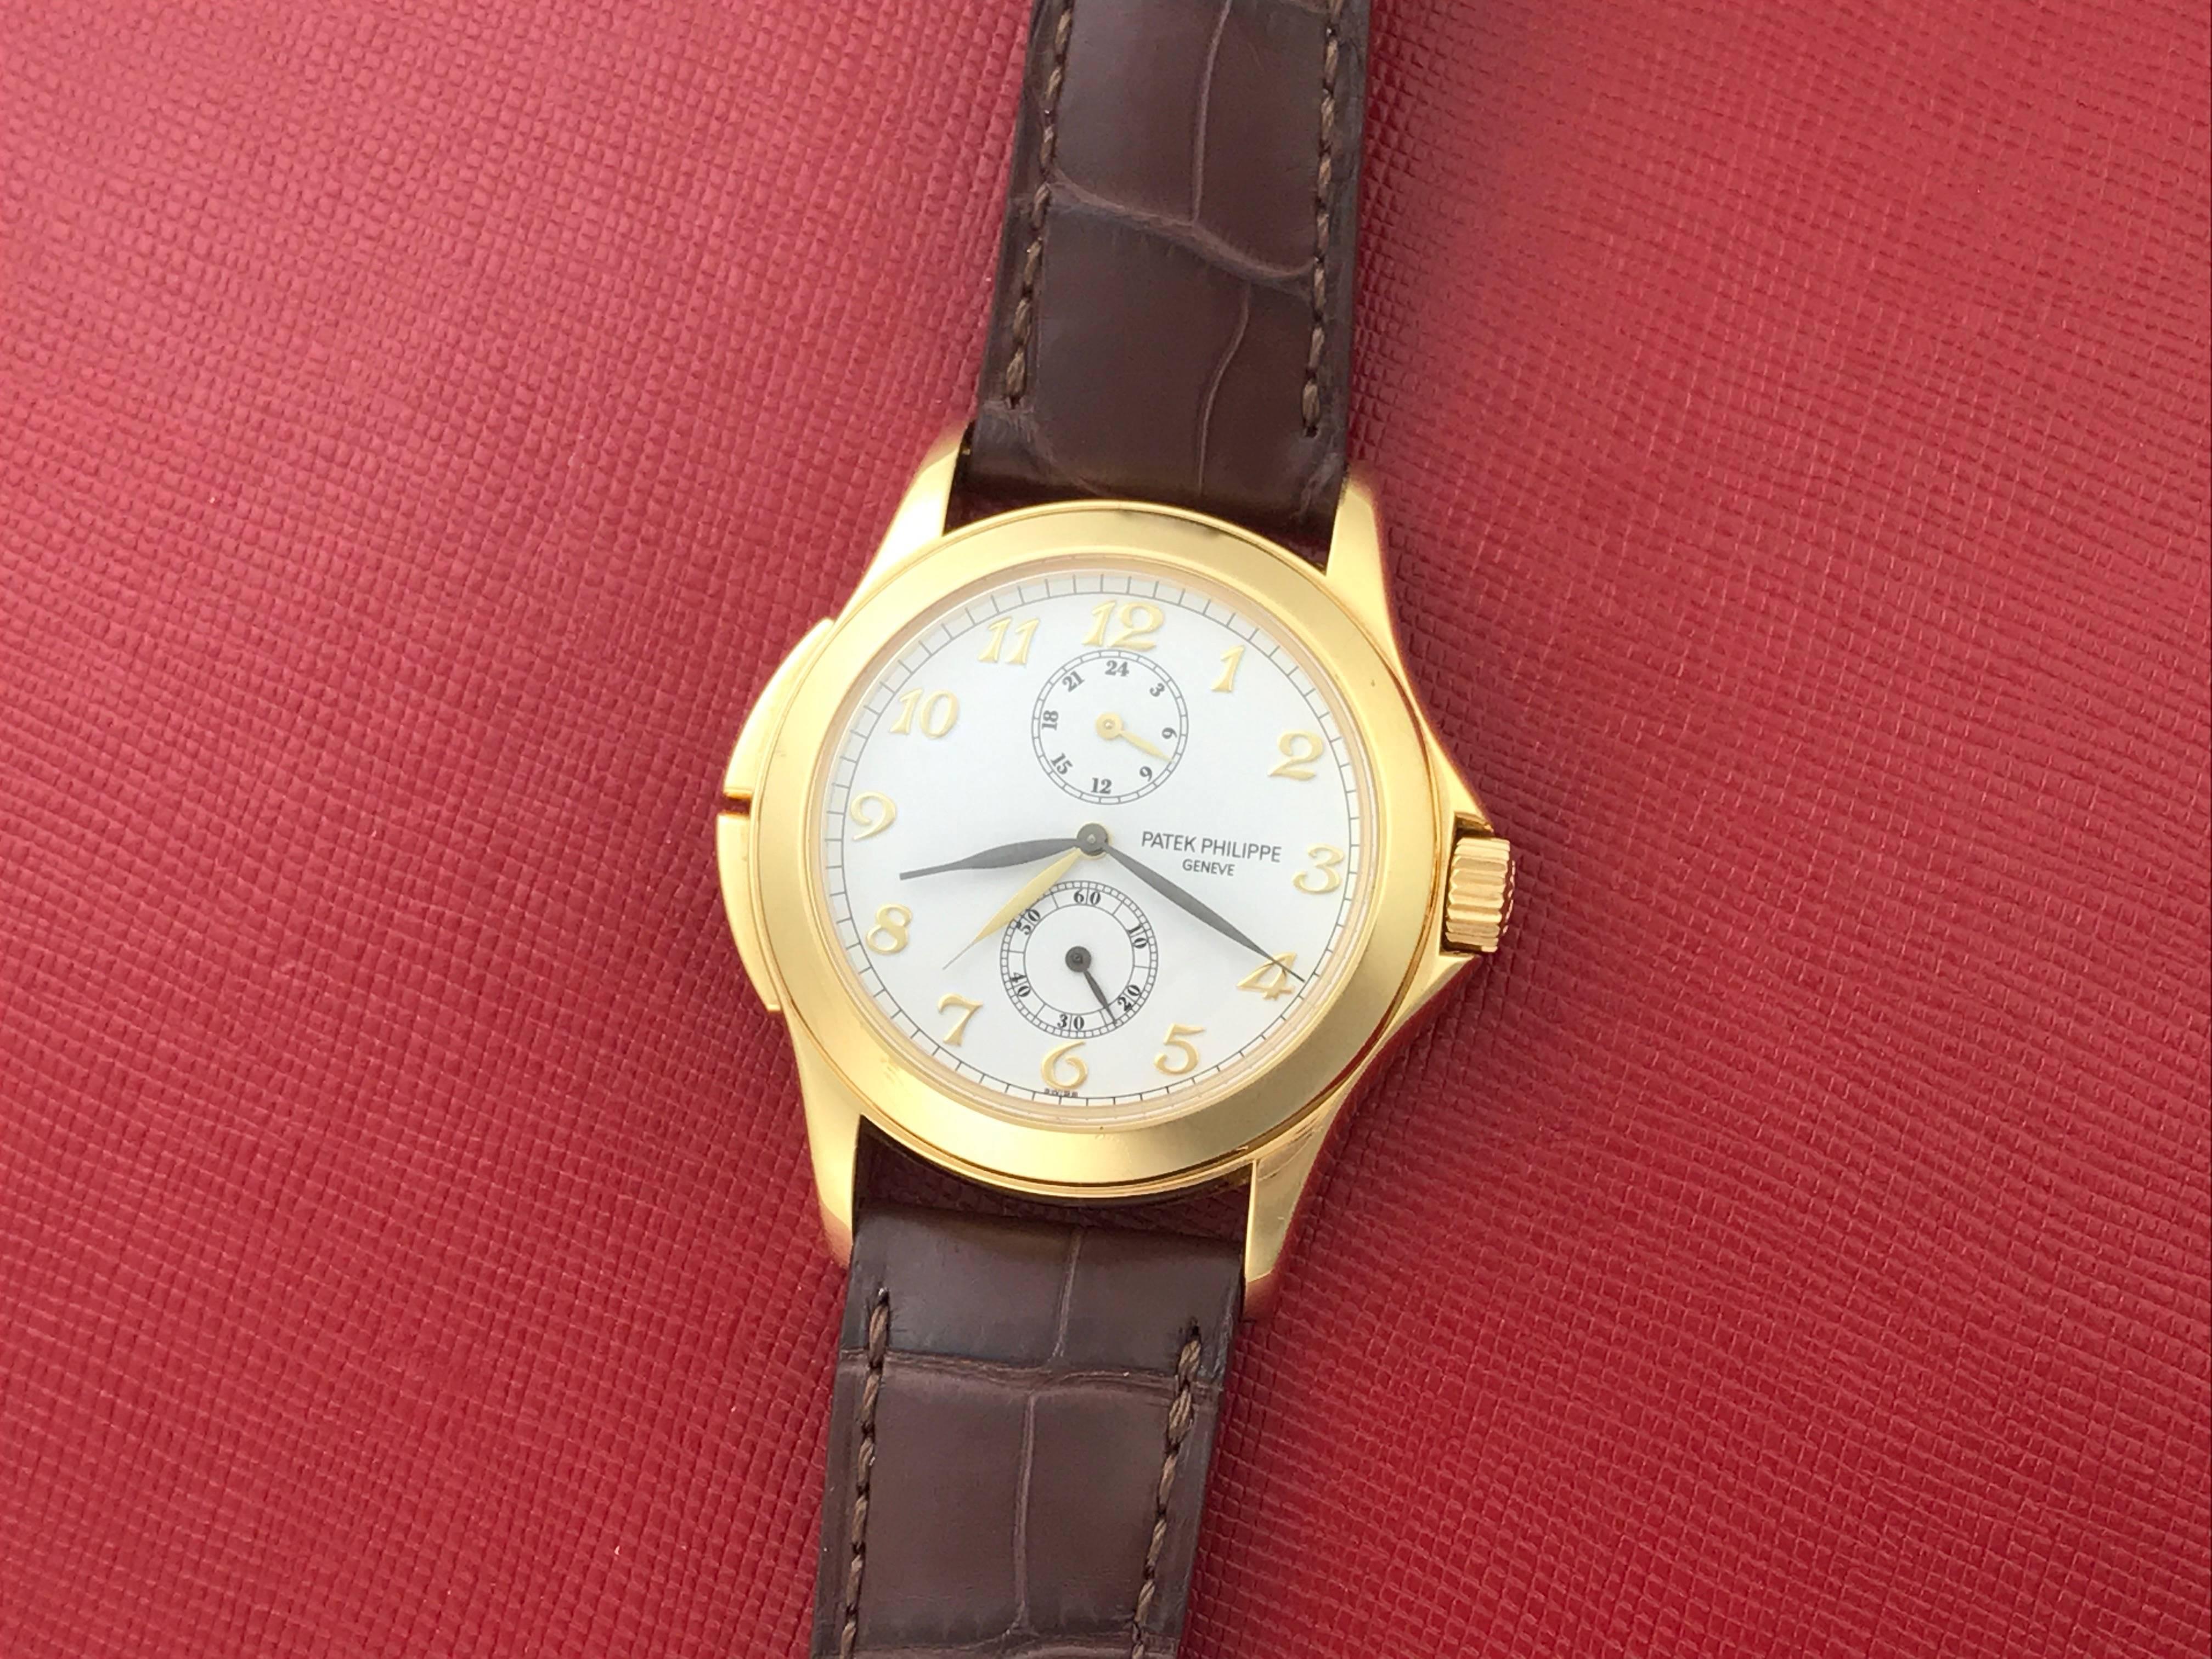 Contemporary Patek Philippe Yellow Gold Travel Time Manual Wind Wristwatch